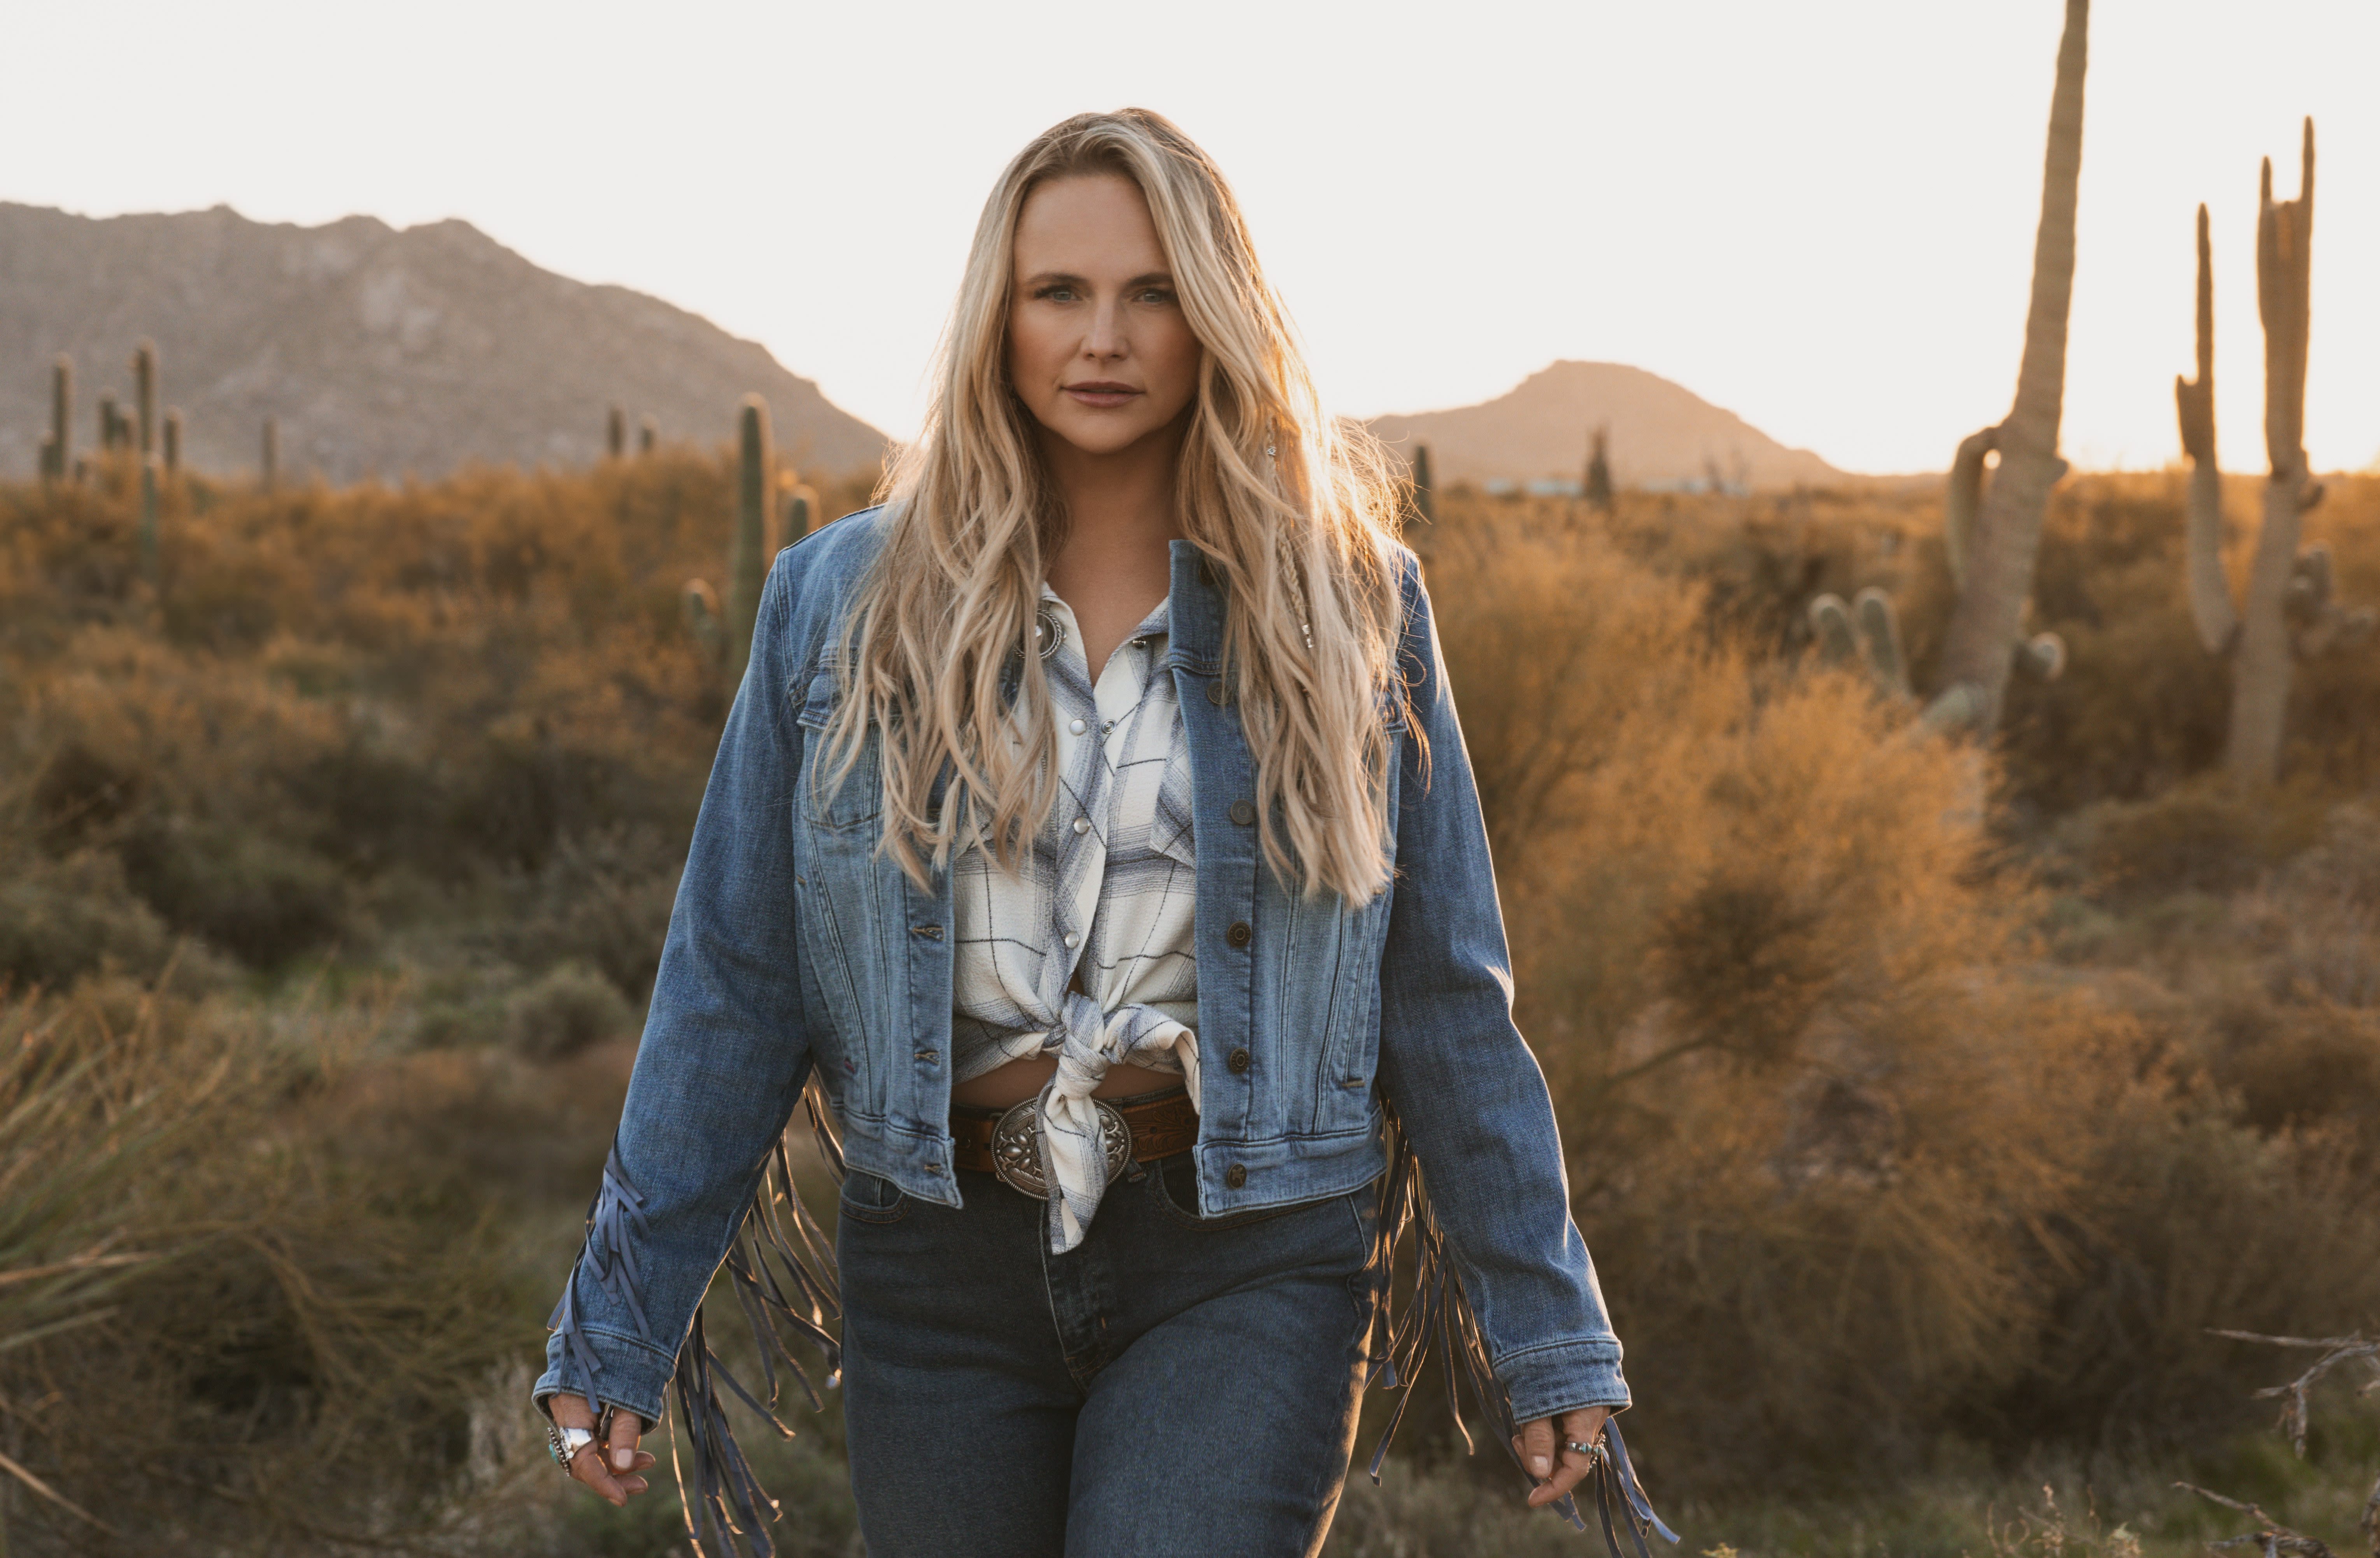 Miranda Lambert on Her New Label, Republic, Setting a Fire With ‘Wranglers,’ and Returning to Recording in Texas: ‘I Just Feel Like...